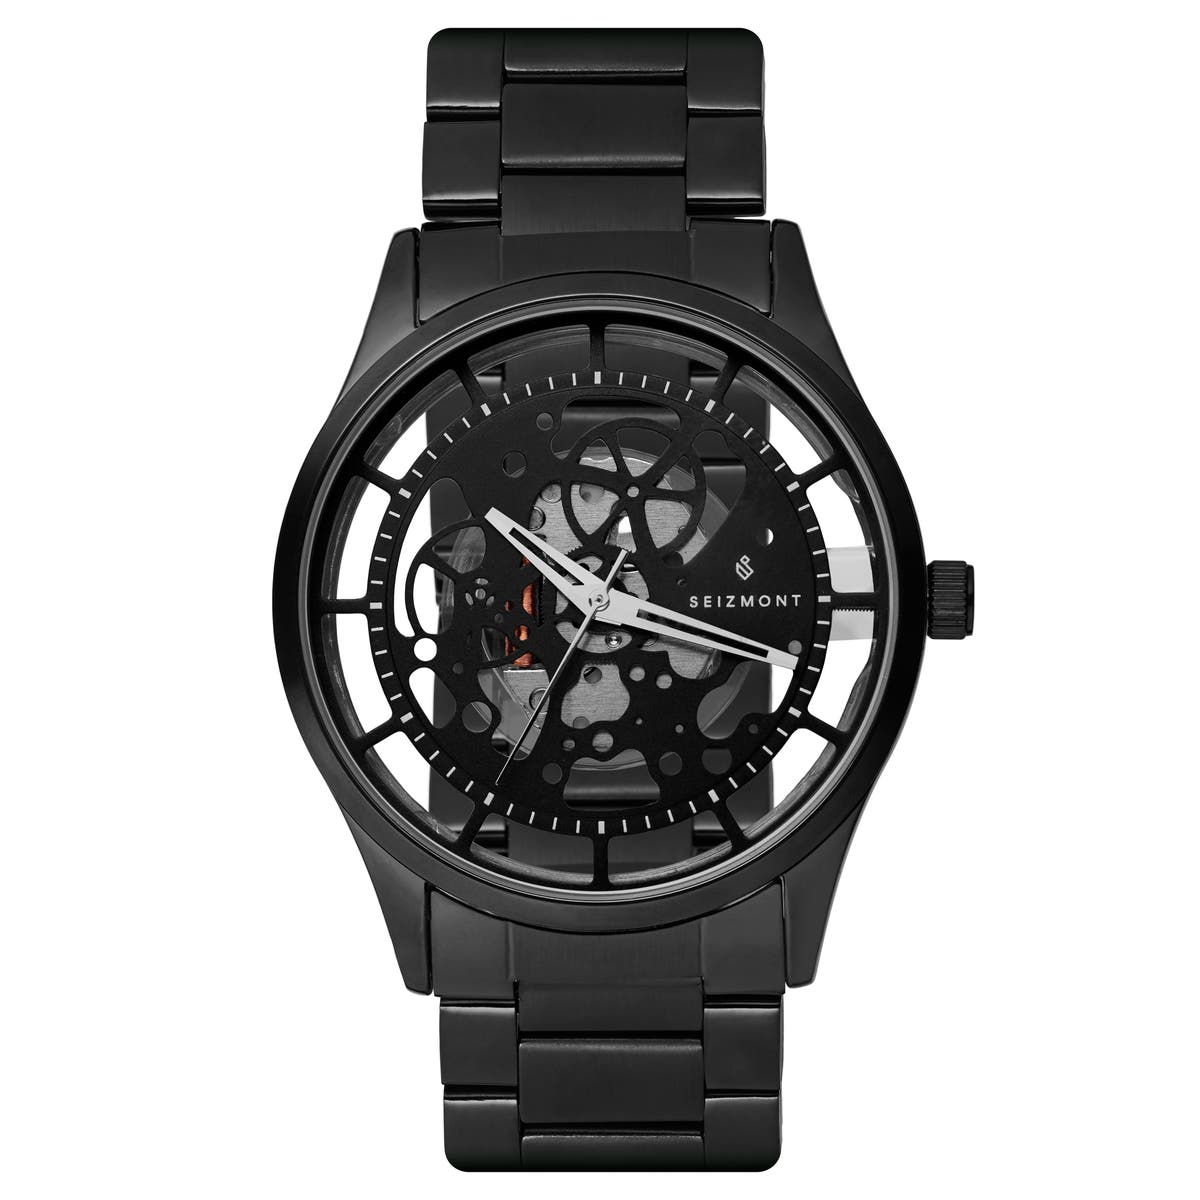 Men's watches | 342 Styles for men in stock | Prices start from £35